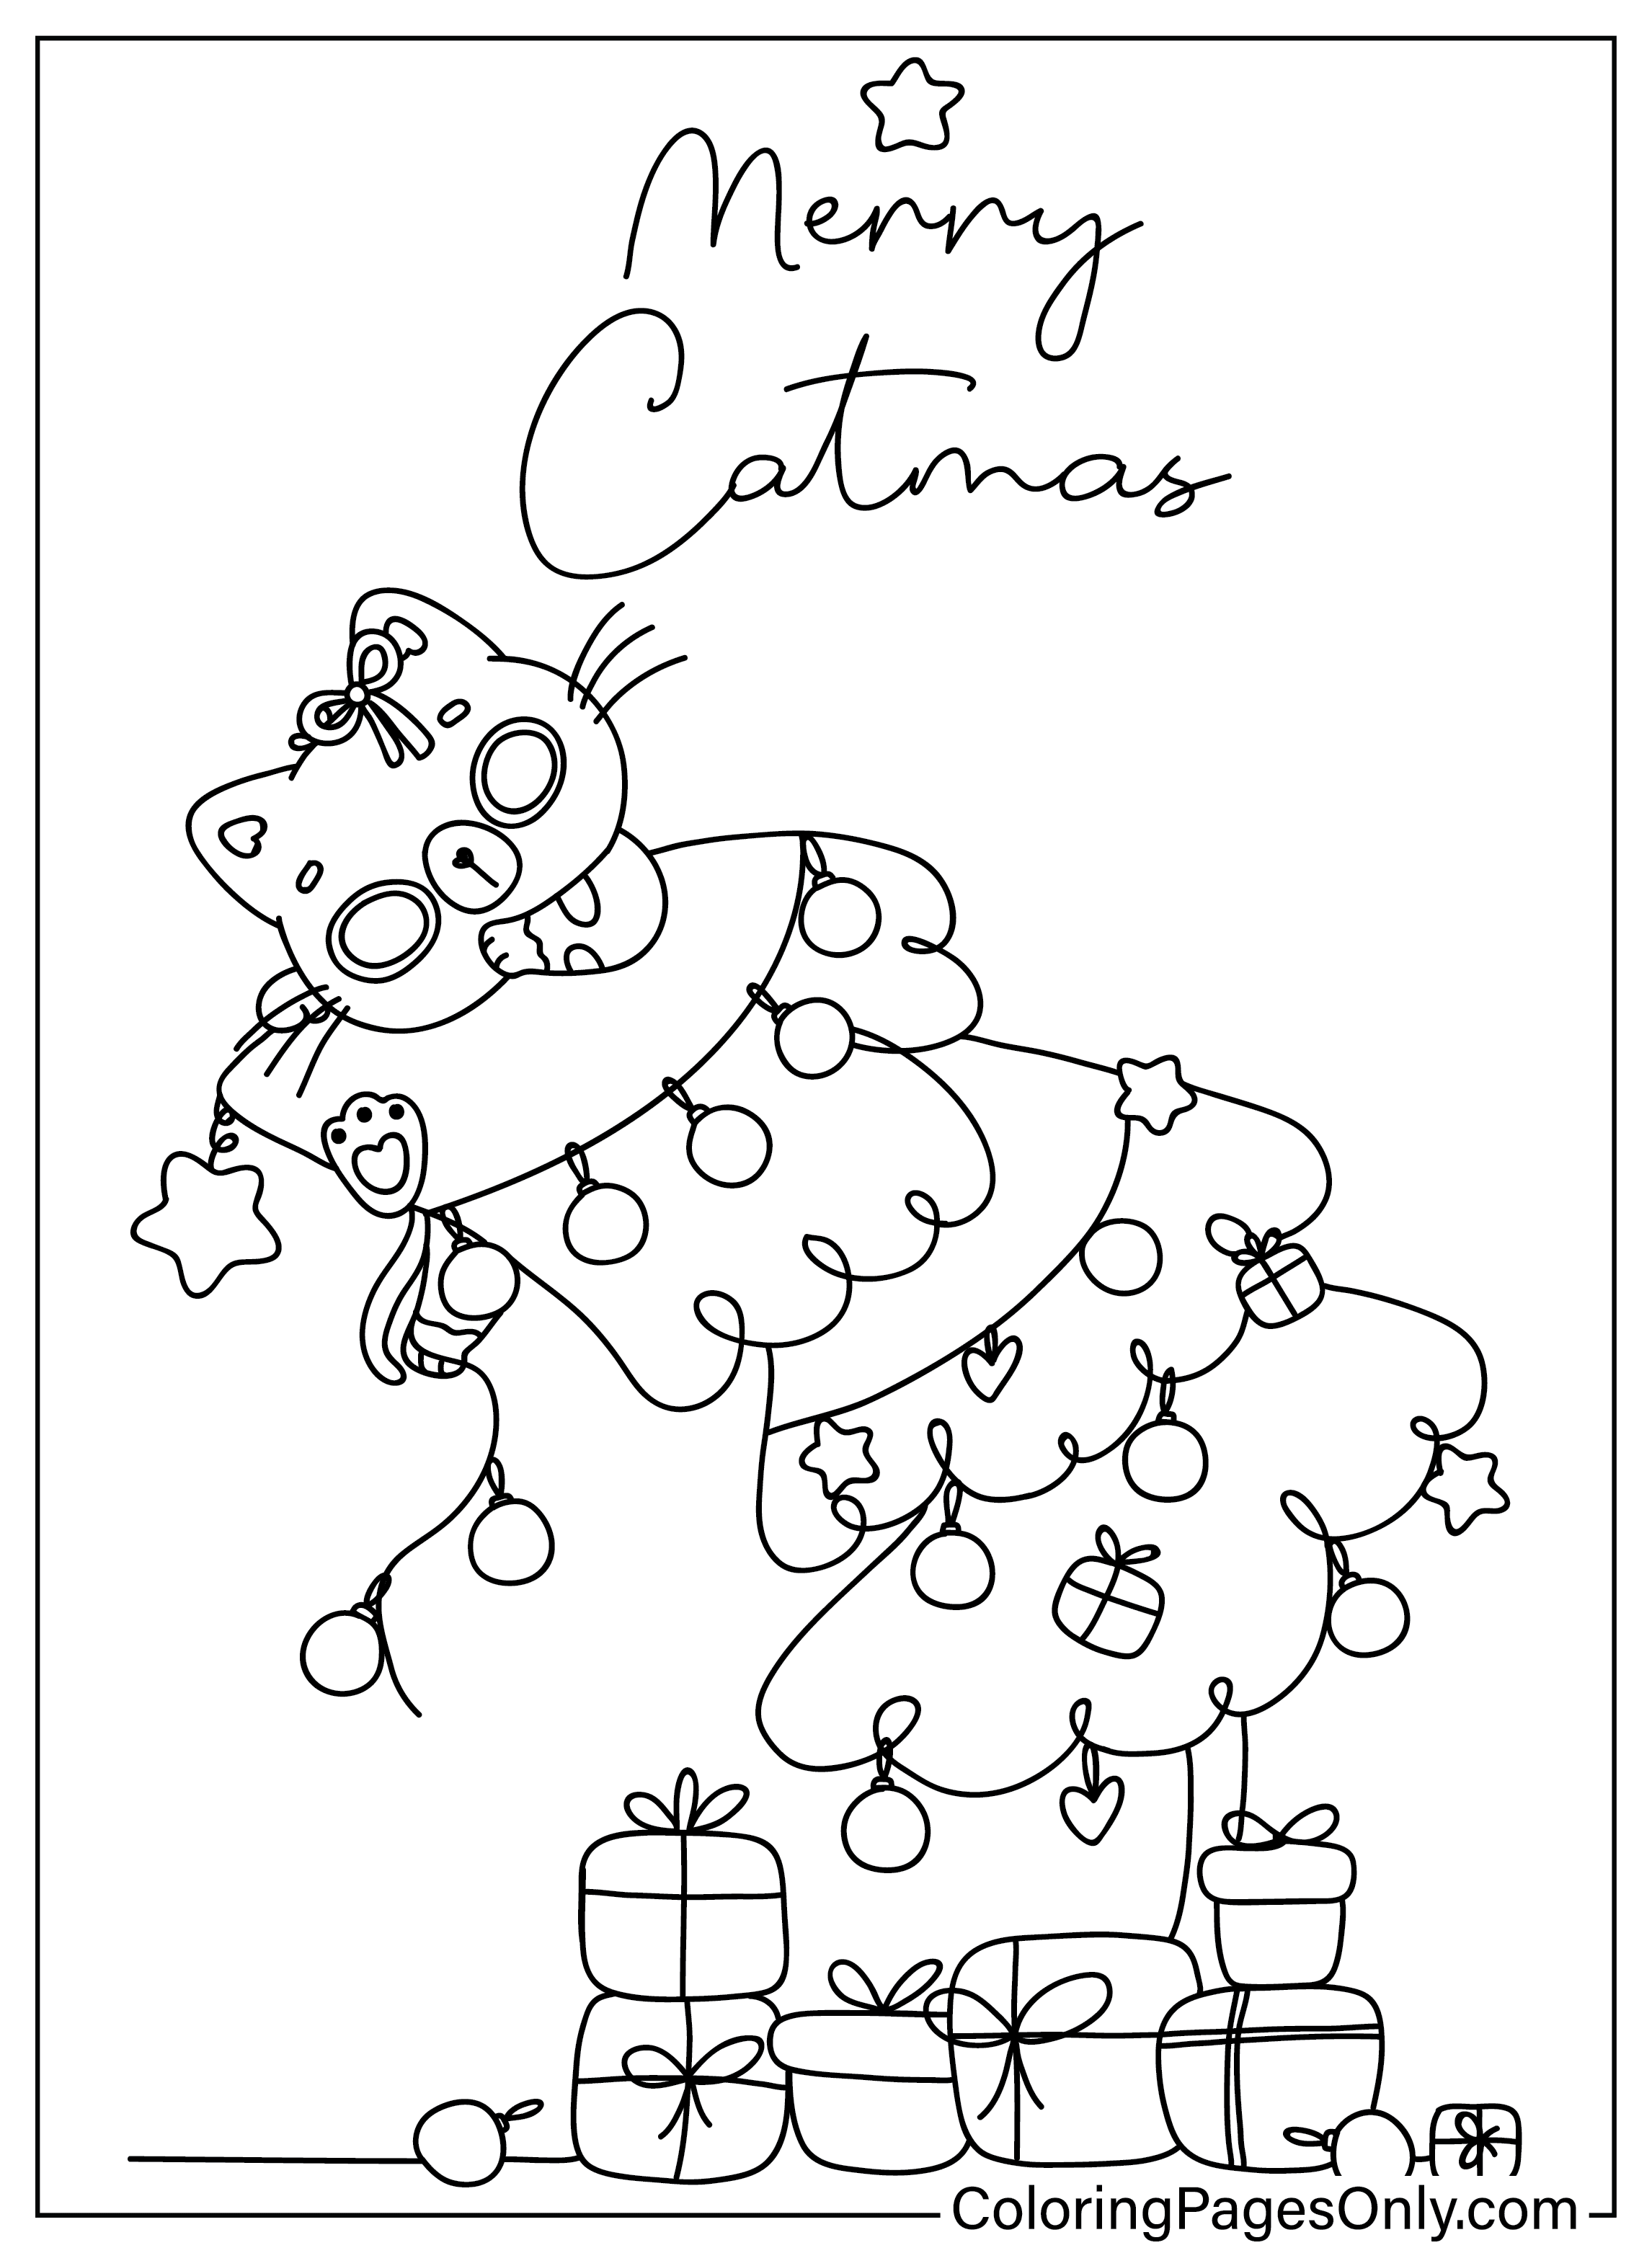 Cute Cat Christmas Coloring Page